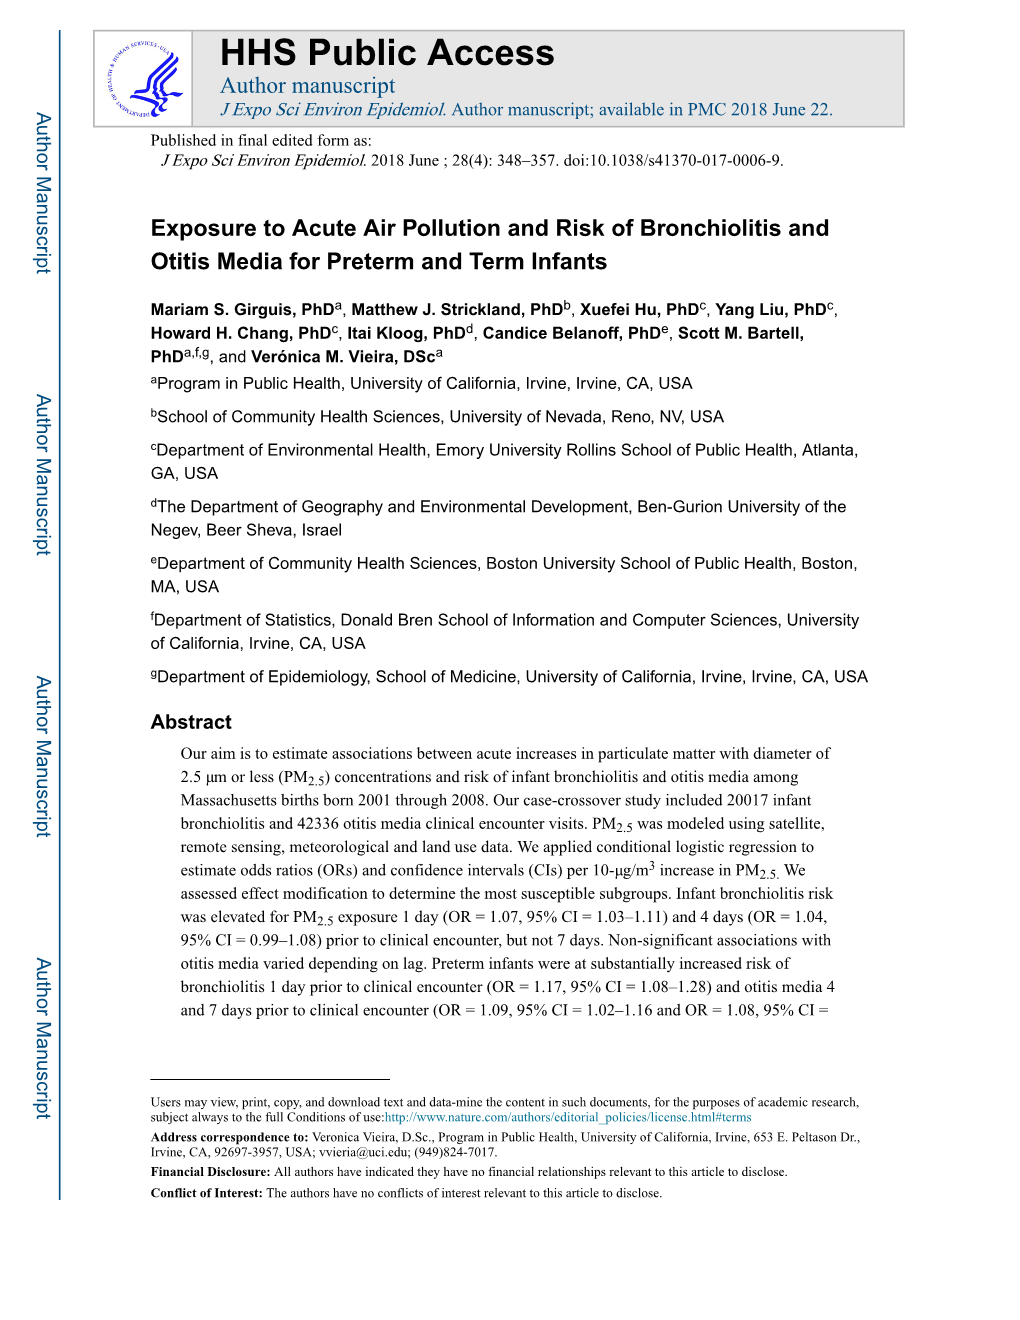 Exposure to Acute Air Pollution and Risk of Bronchiolitis and Otitis Media for Preterm and Term Infants